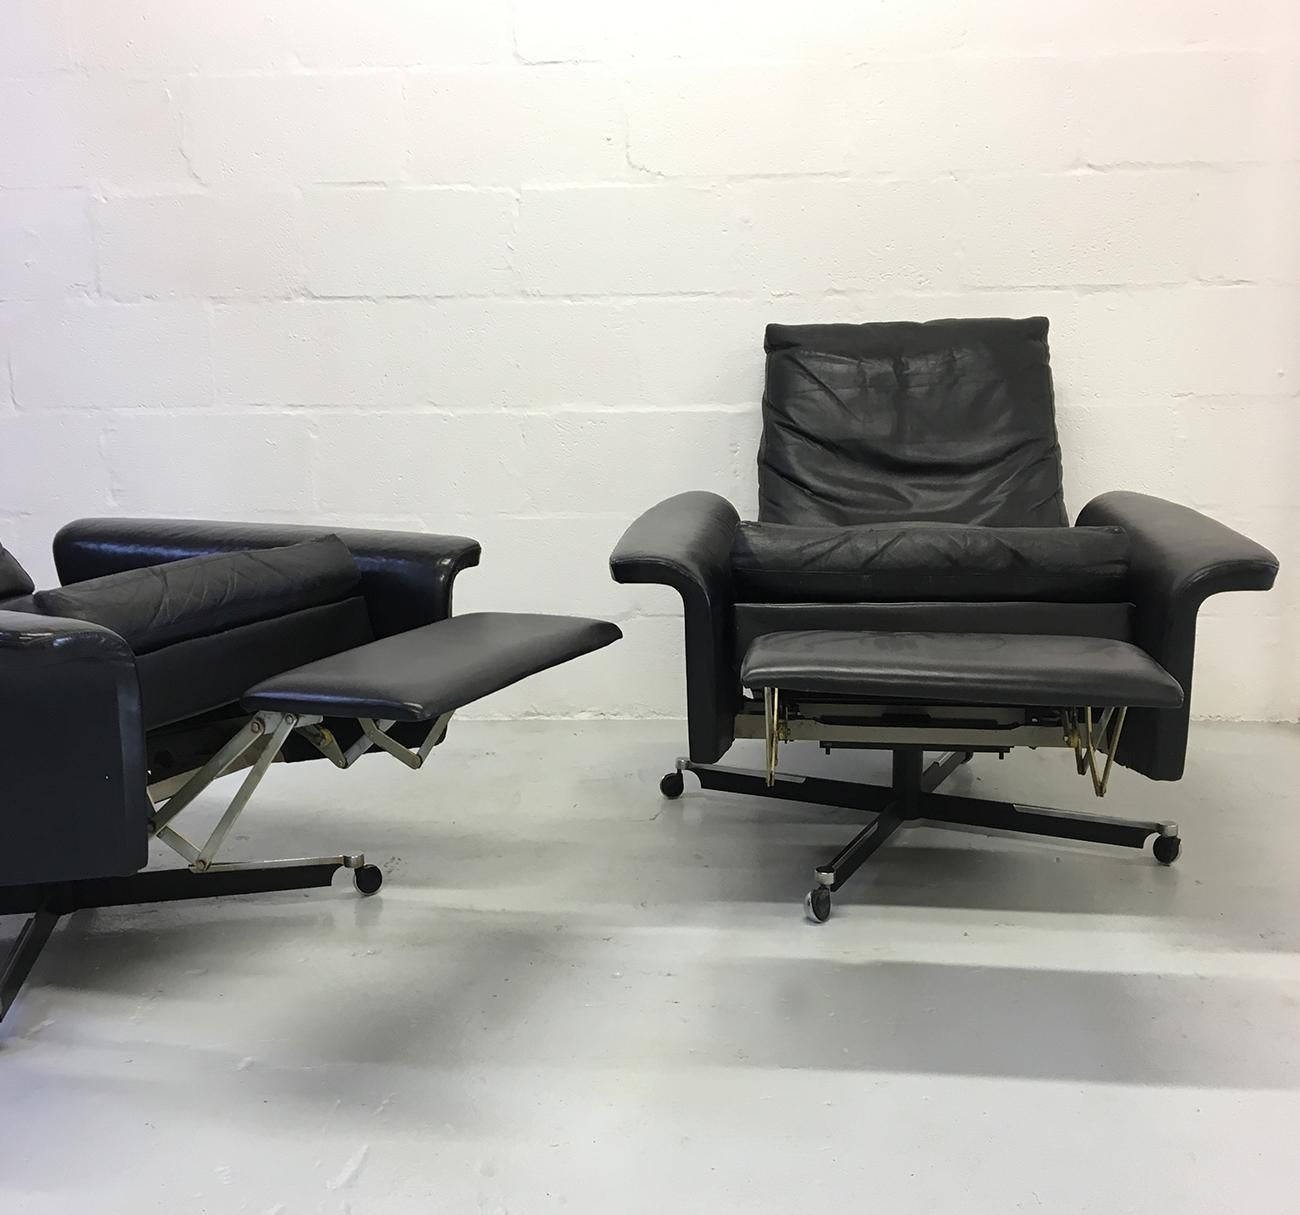 German Pair of 1960s Mid-Century Modern Black Leather Reclining Lay-Z-Boy Lounge Chairs